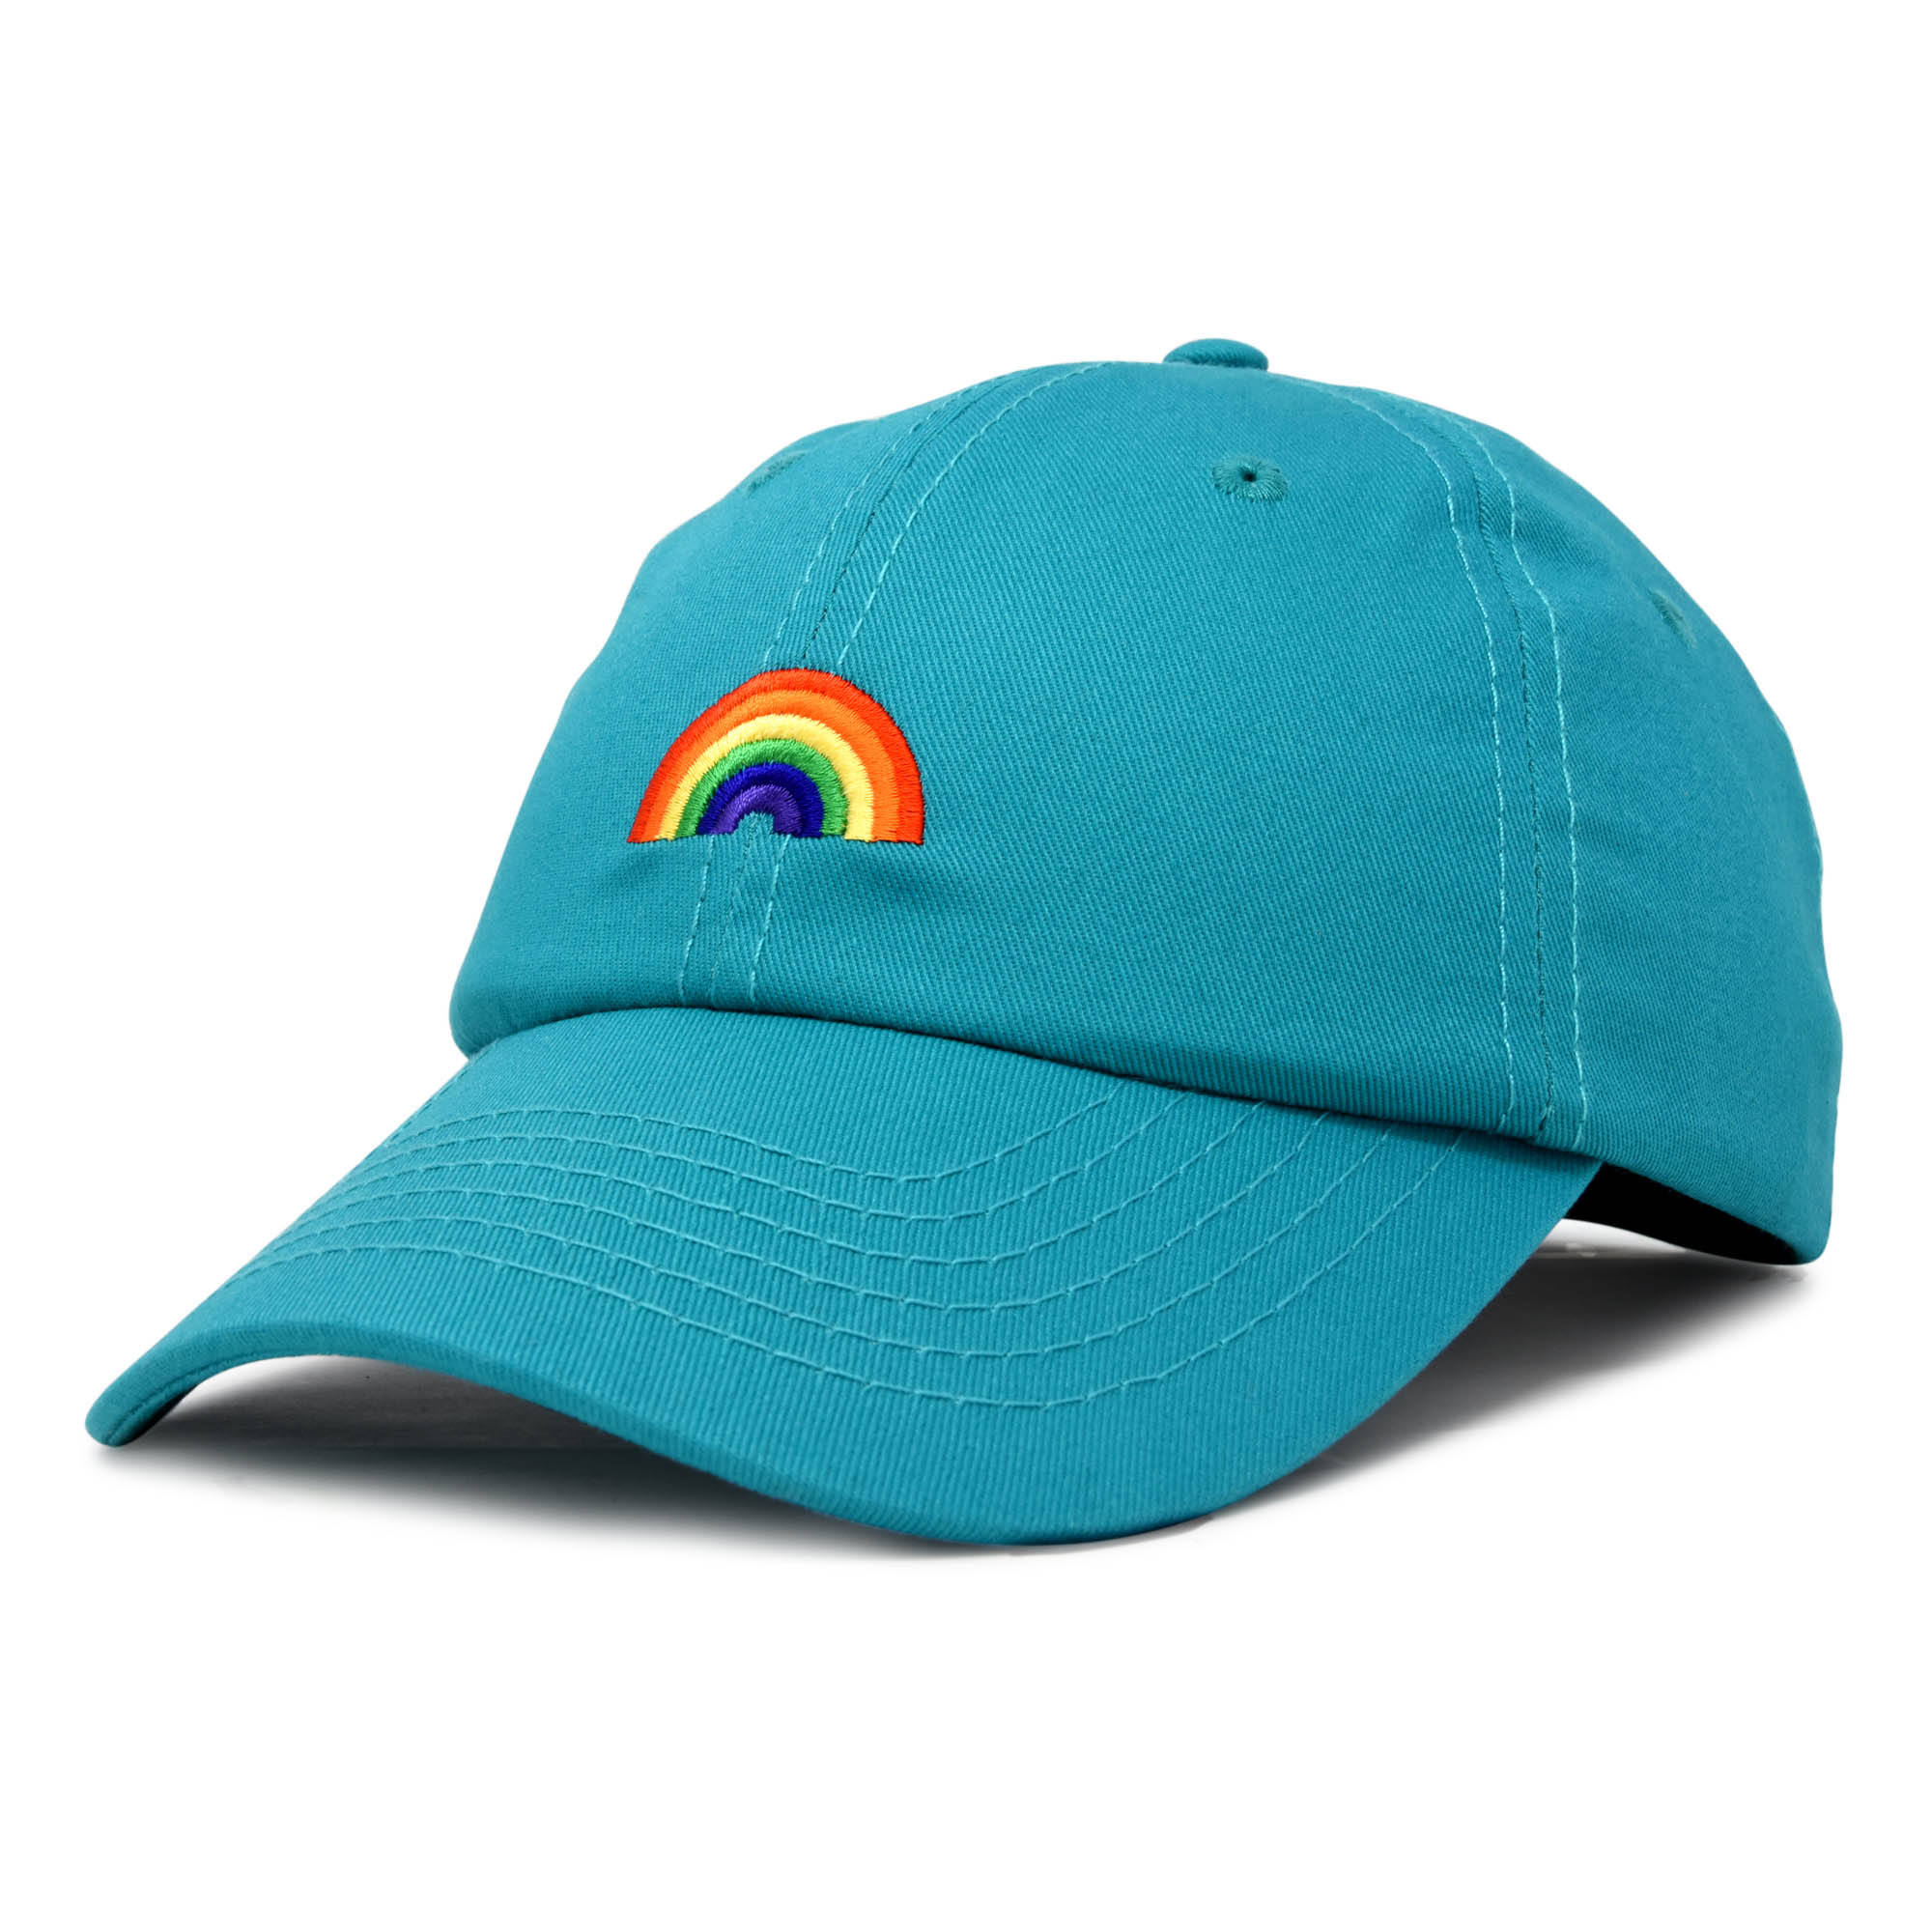 DALIX Rainbow Baseball Cap Womens Hats Cute Hat Soft Cotton Caps in Teal - image 1 of 7